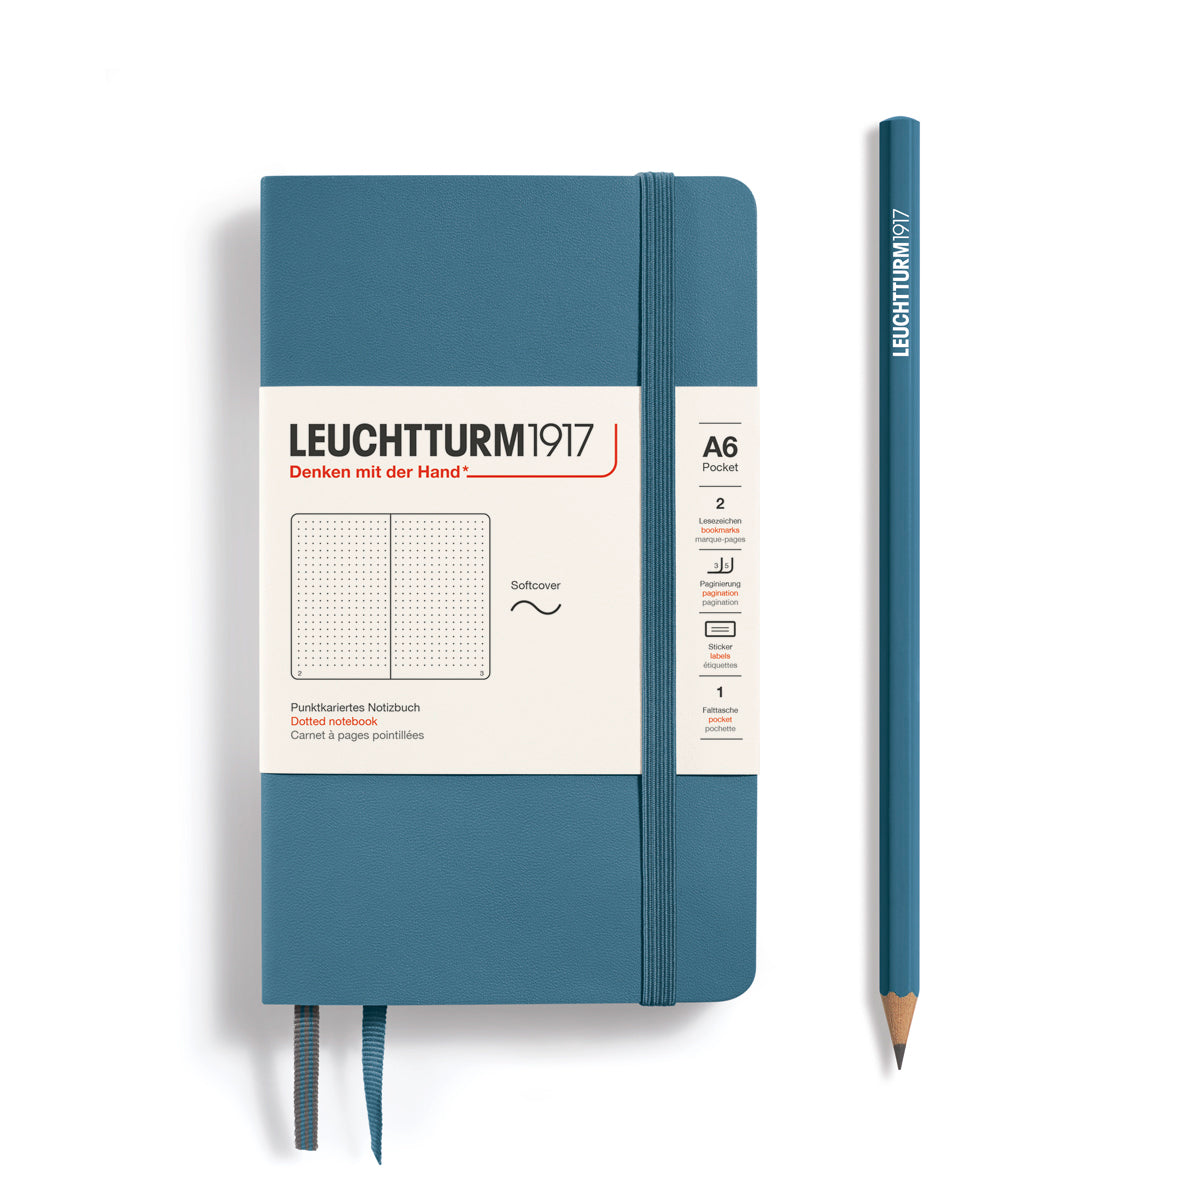 LEUCHTTURM1917 Notebook A6 Pocket Softcover in stone blue and dotted inside at Penny Black